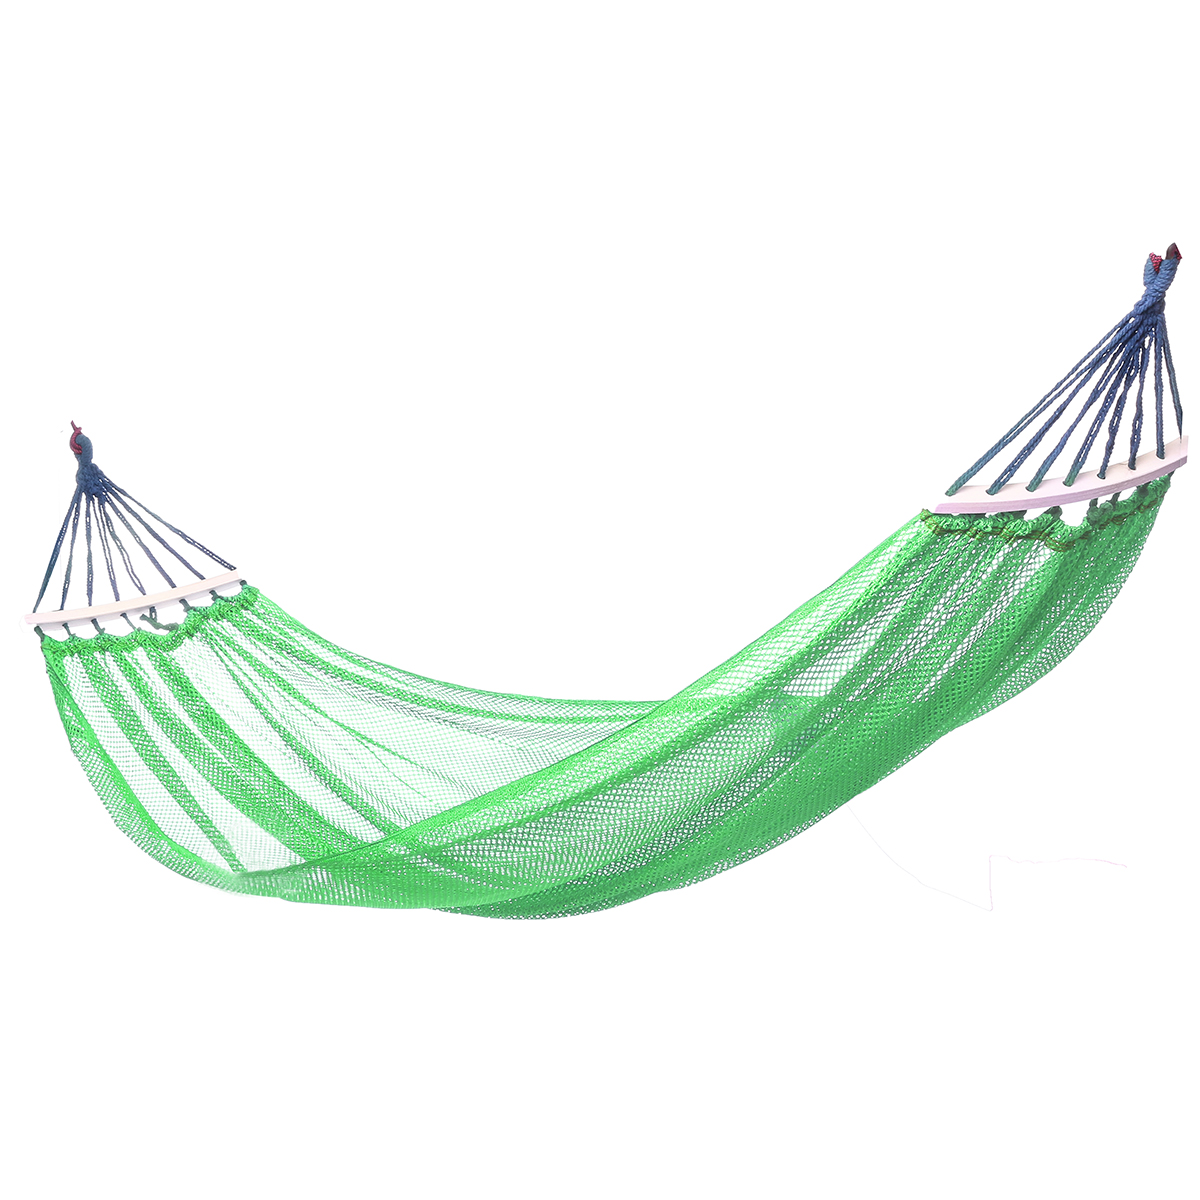 

244x130cm Outdoor Hammock Nylon Hanging Swing Bed Outdoor Camping Portable Woven Swing